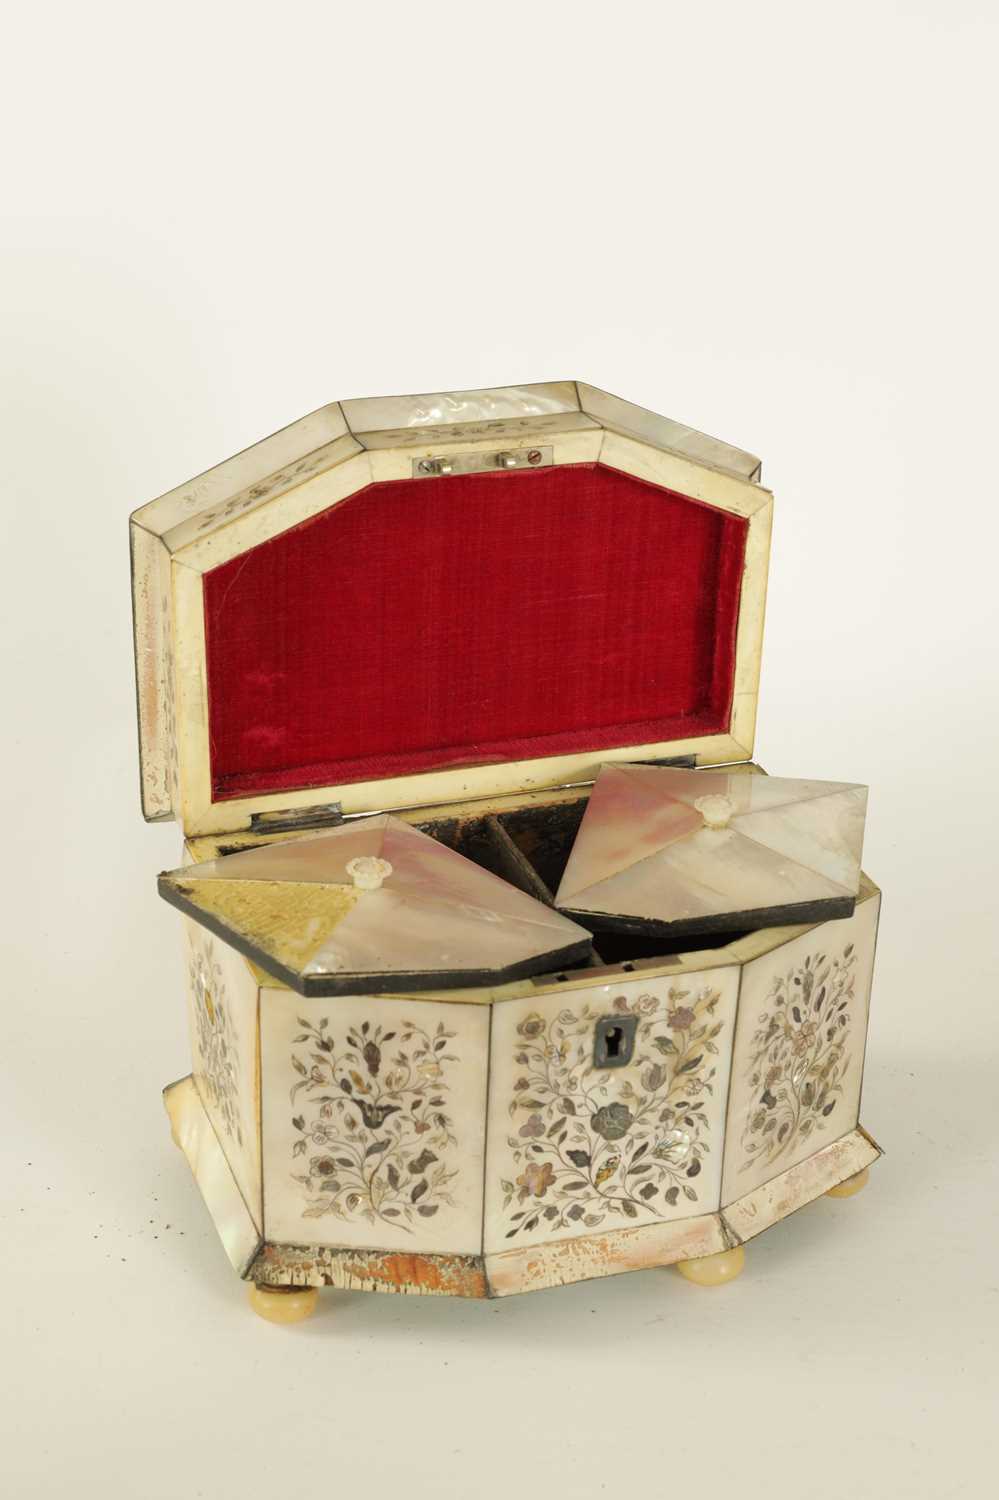 A 19TH CENTURY INLAID MOTHER OF PEARL TEA CADDY WITH CANTED ANGLED FRONT - Image 6 of 10